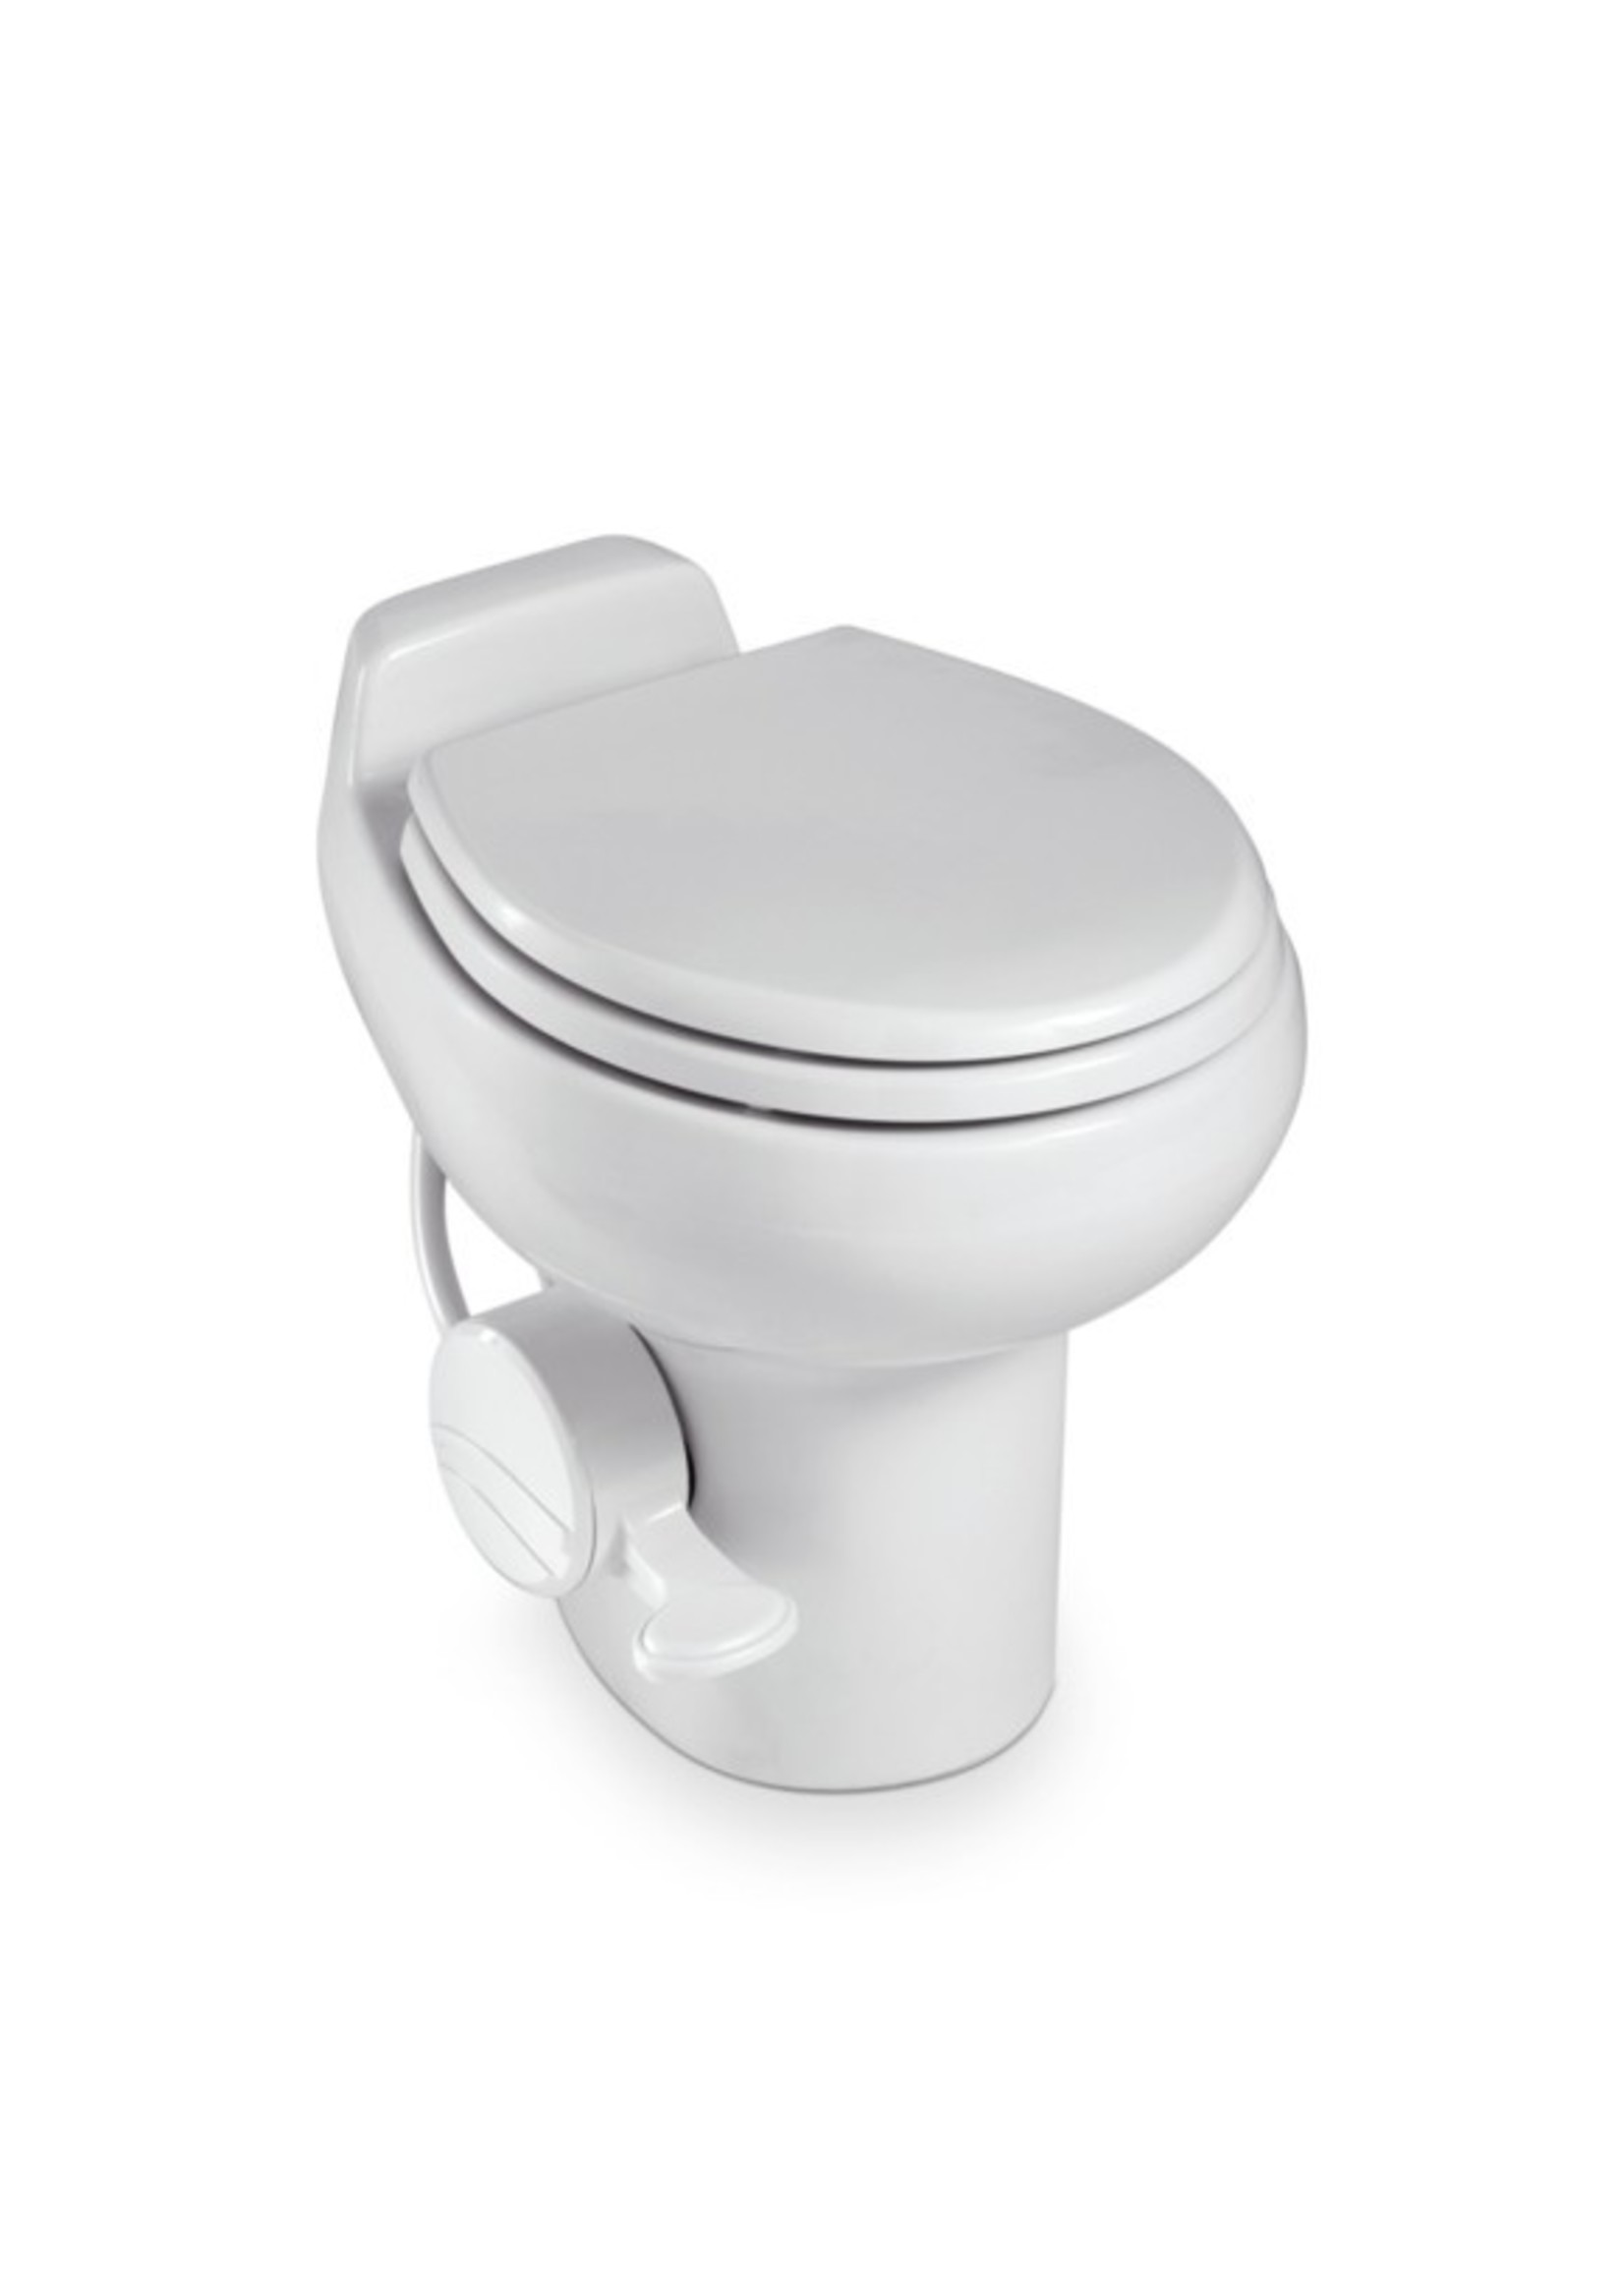 DOMETIC Dometic 510 PS Gravity Toilet-510 traveller White (flange required)